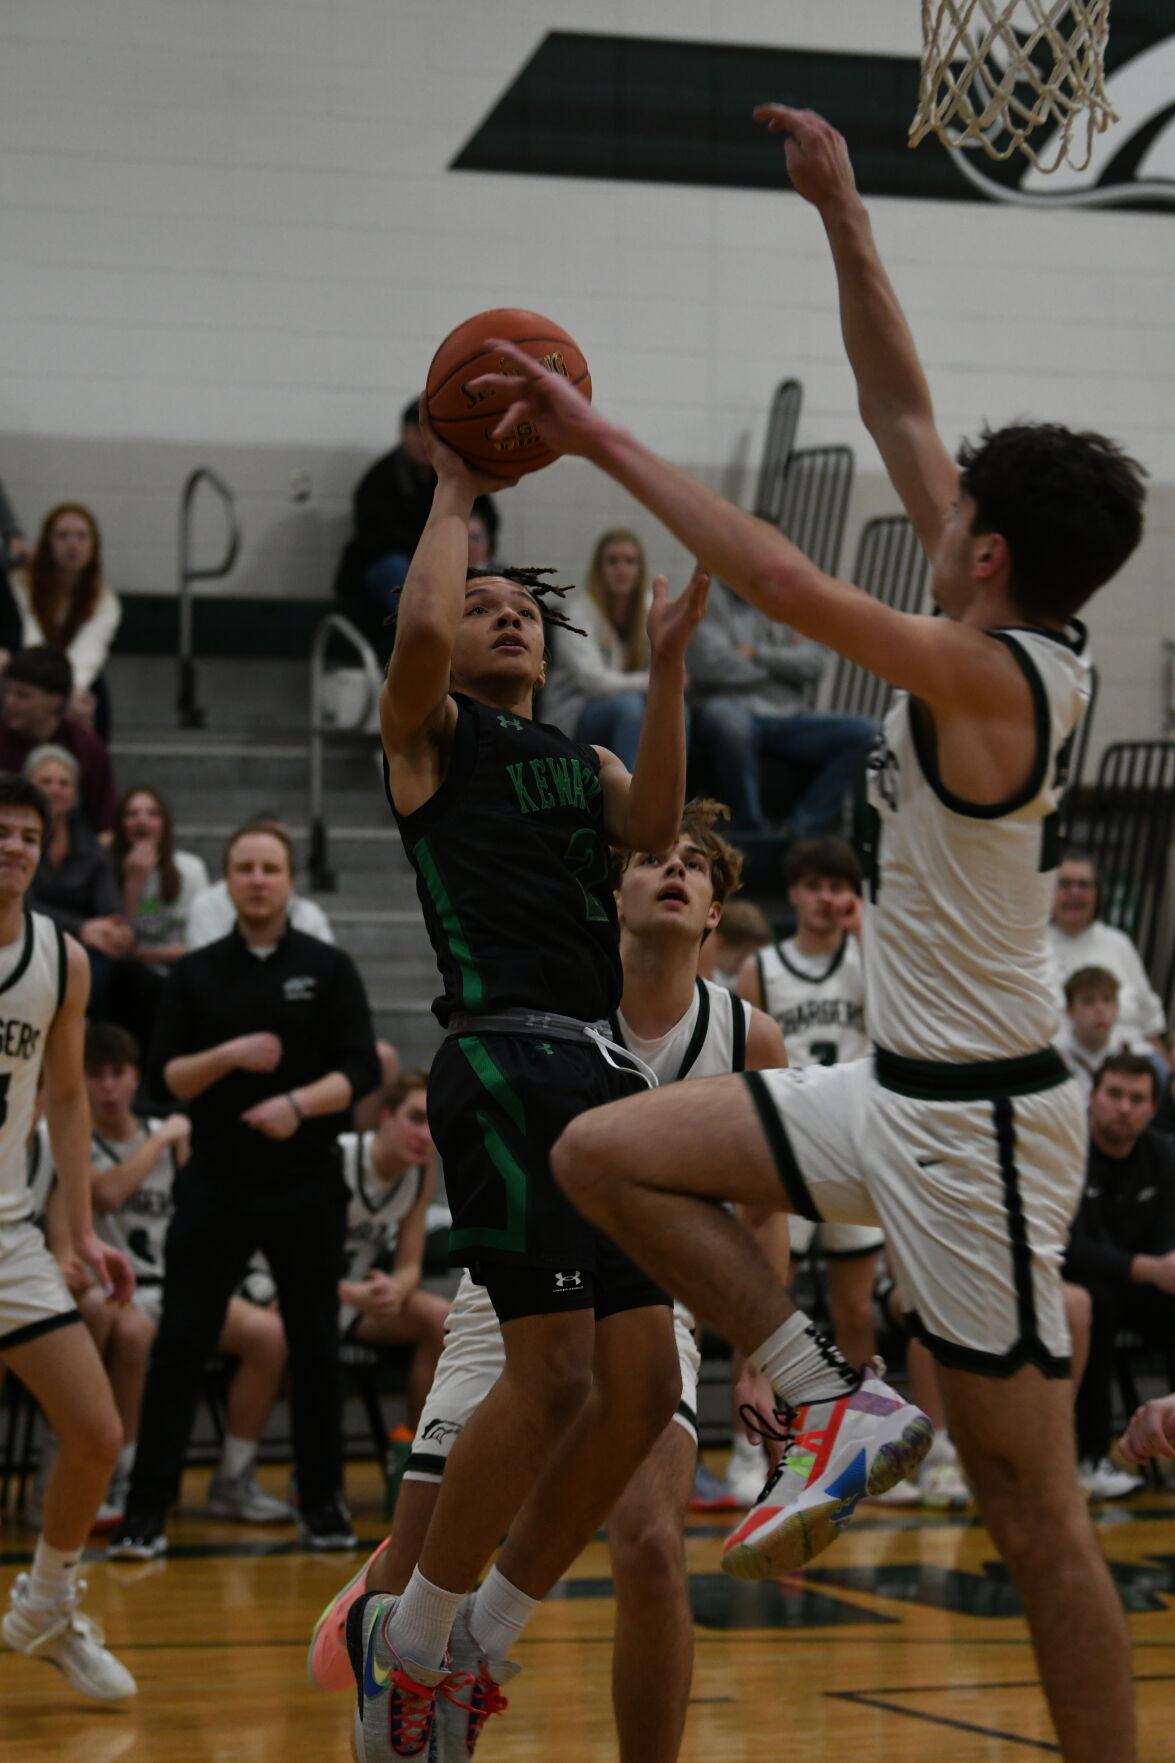 Kettle Moraine Lutheran’s Strong Defense and 3-Pointers Secure Victory Over Kewaskum in D3 Basketball Clash